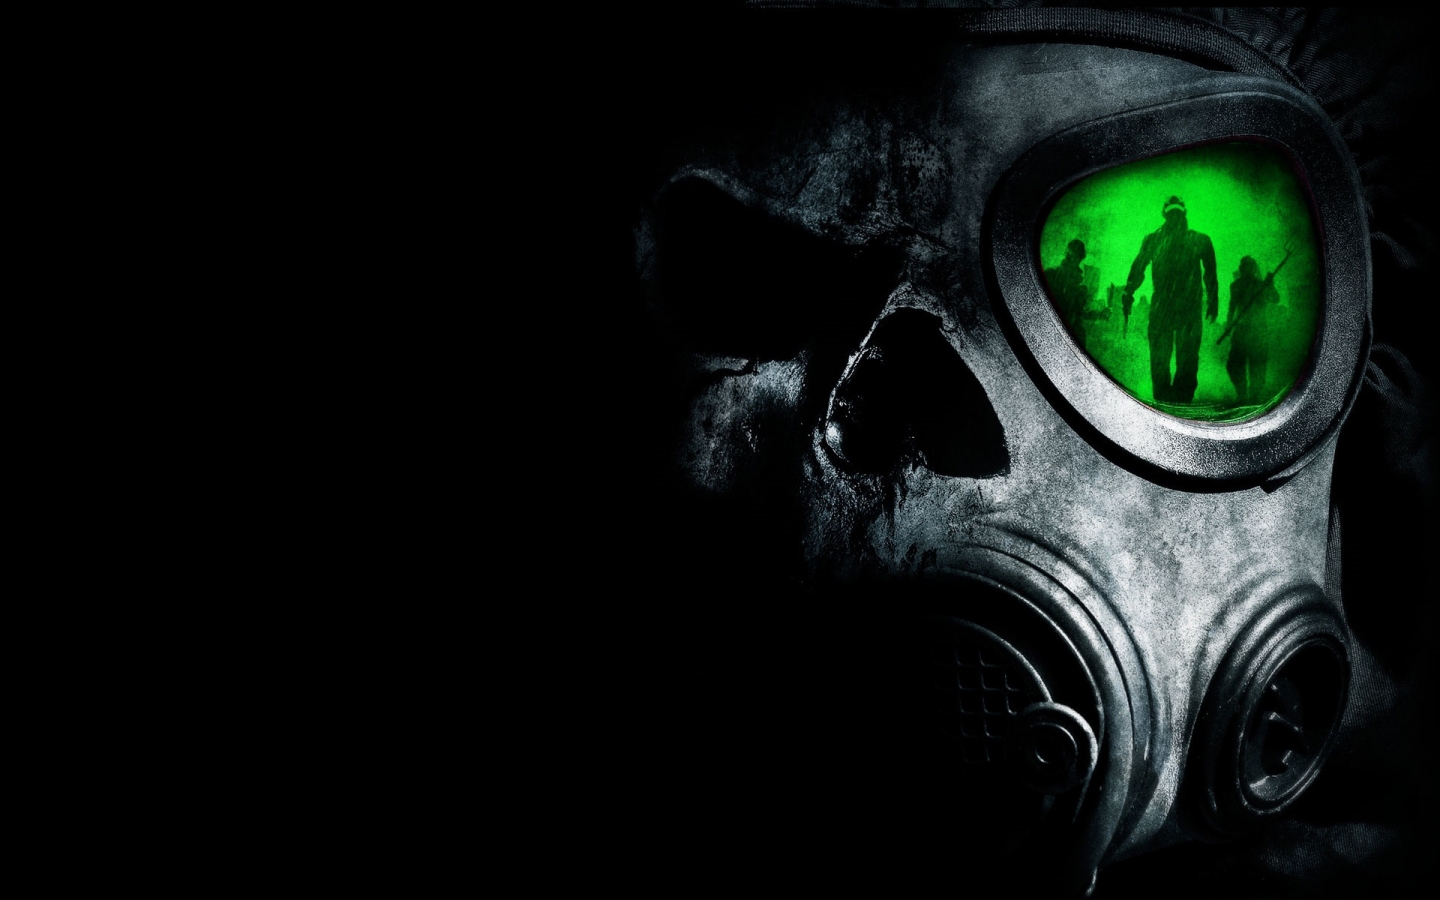 Gas Mask for 1440 x 900 widescreen resolution